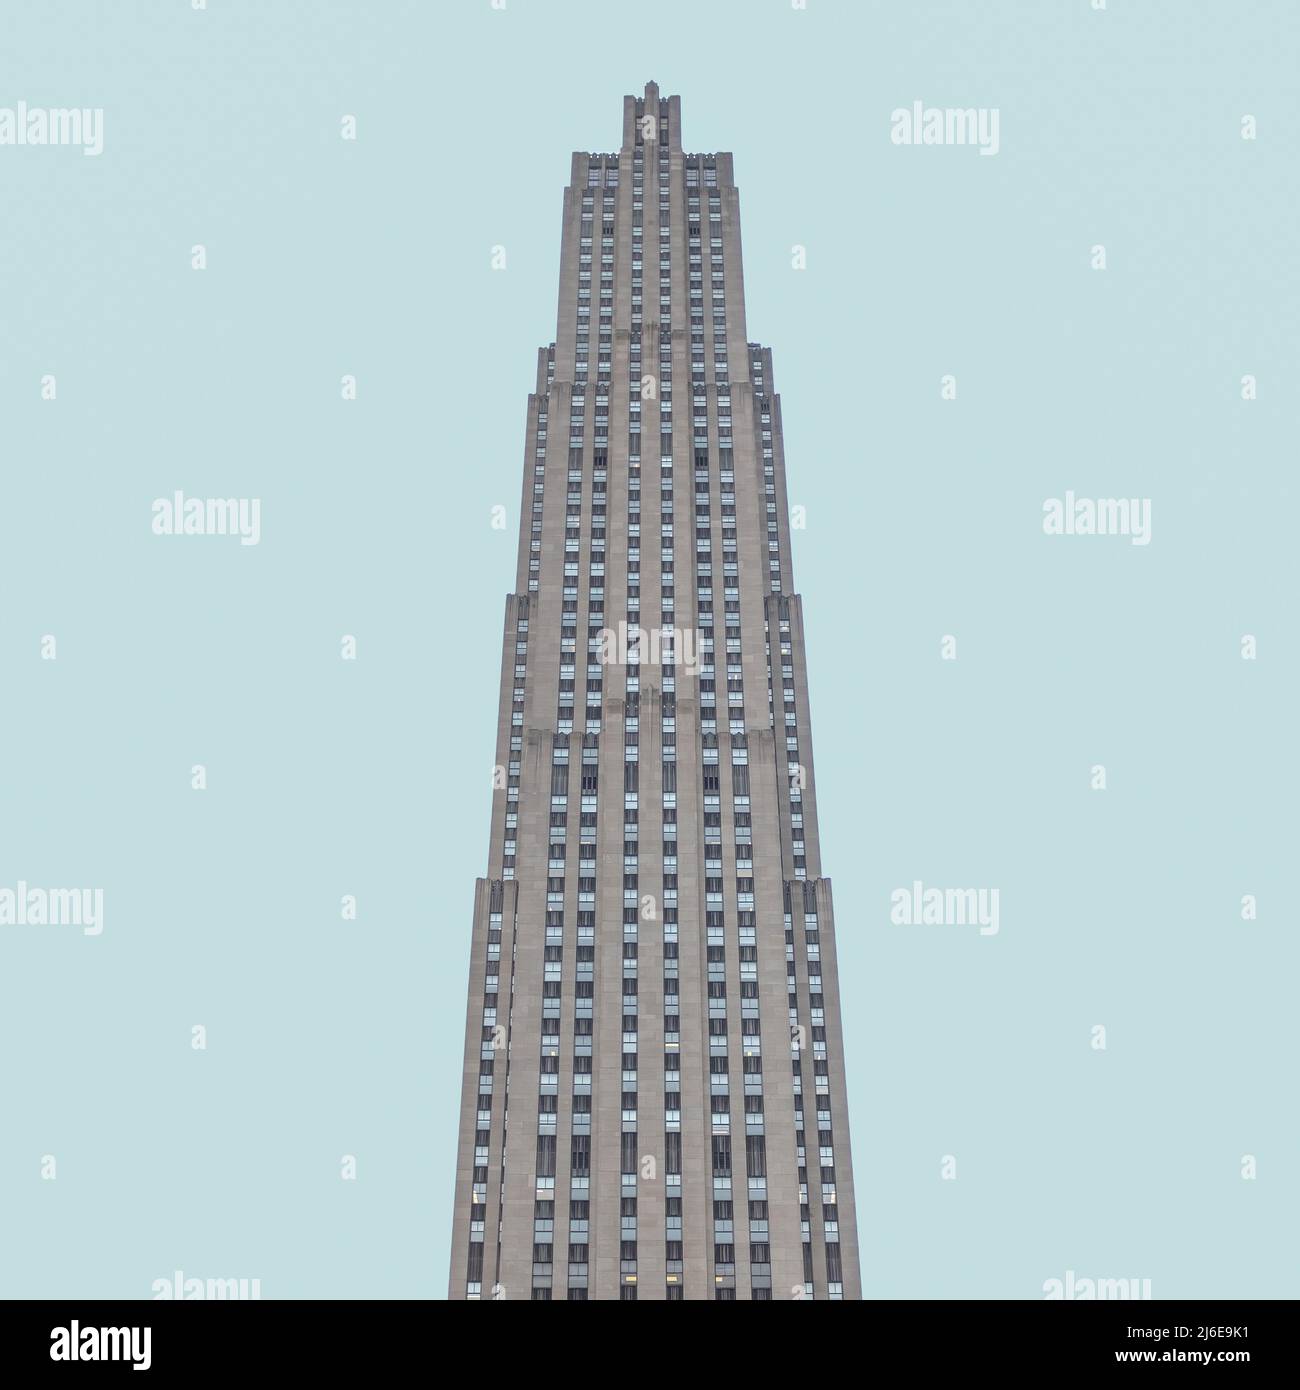 Minimalist Image Of A Single Skyscraper In A US City, With Copy Space Stock Photo